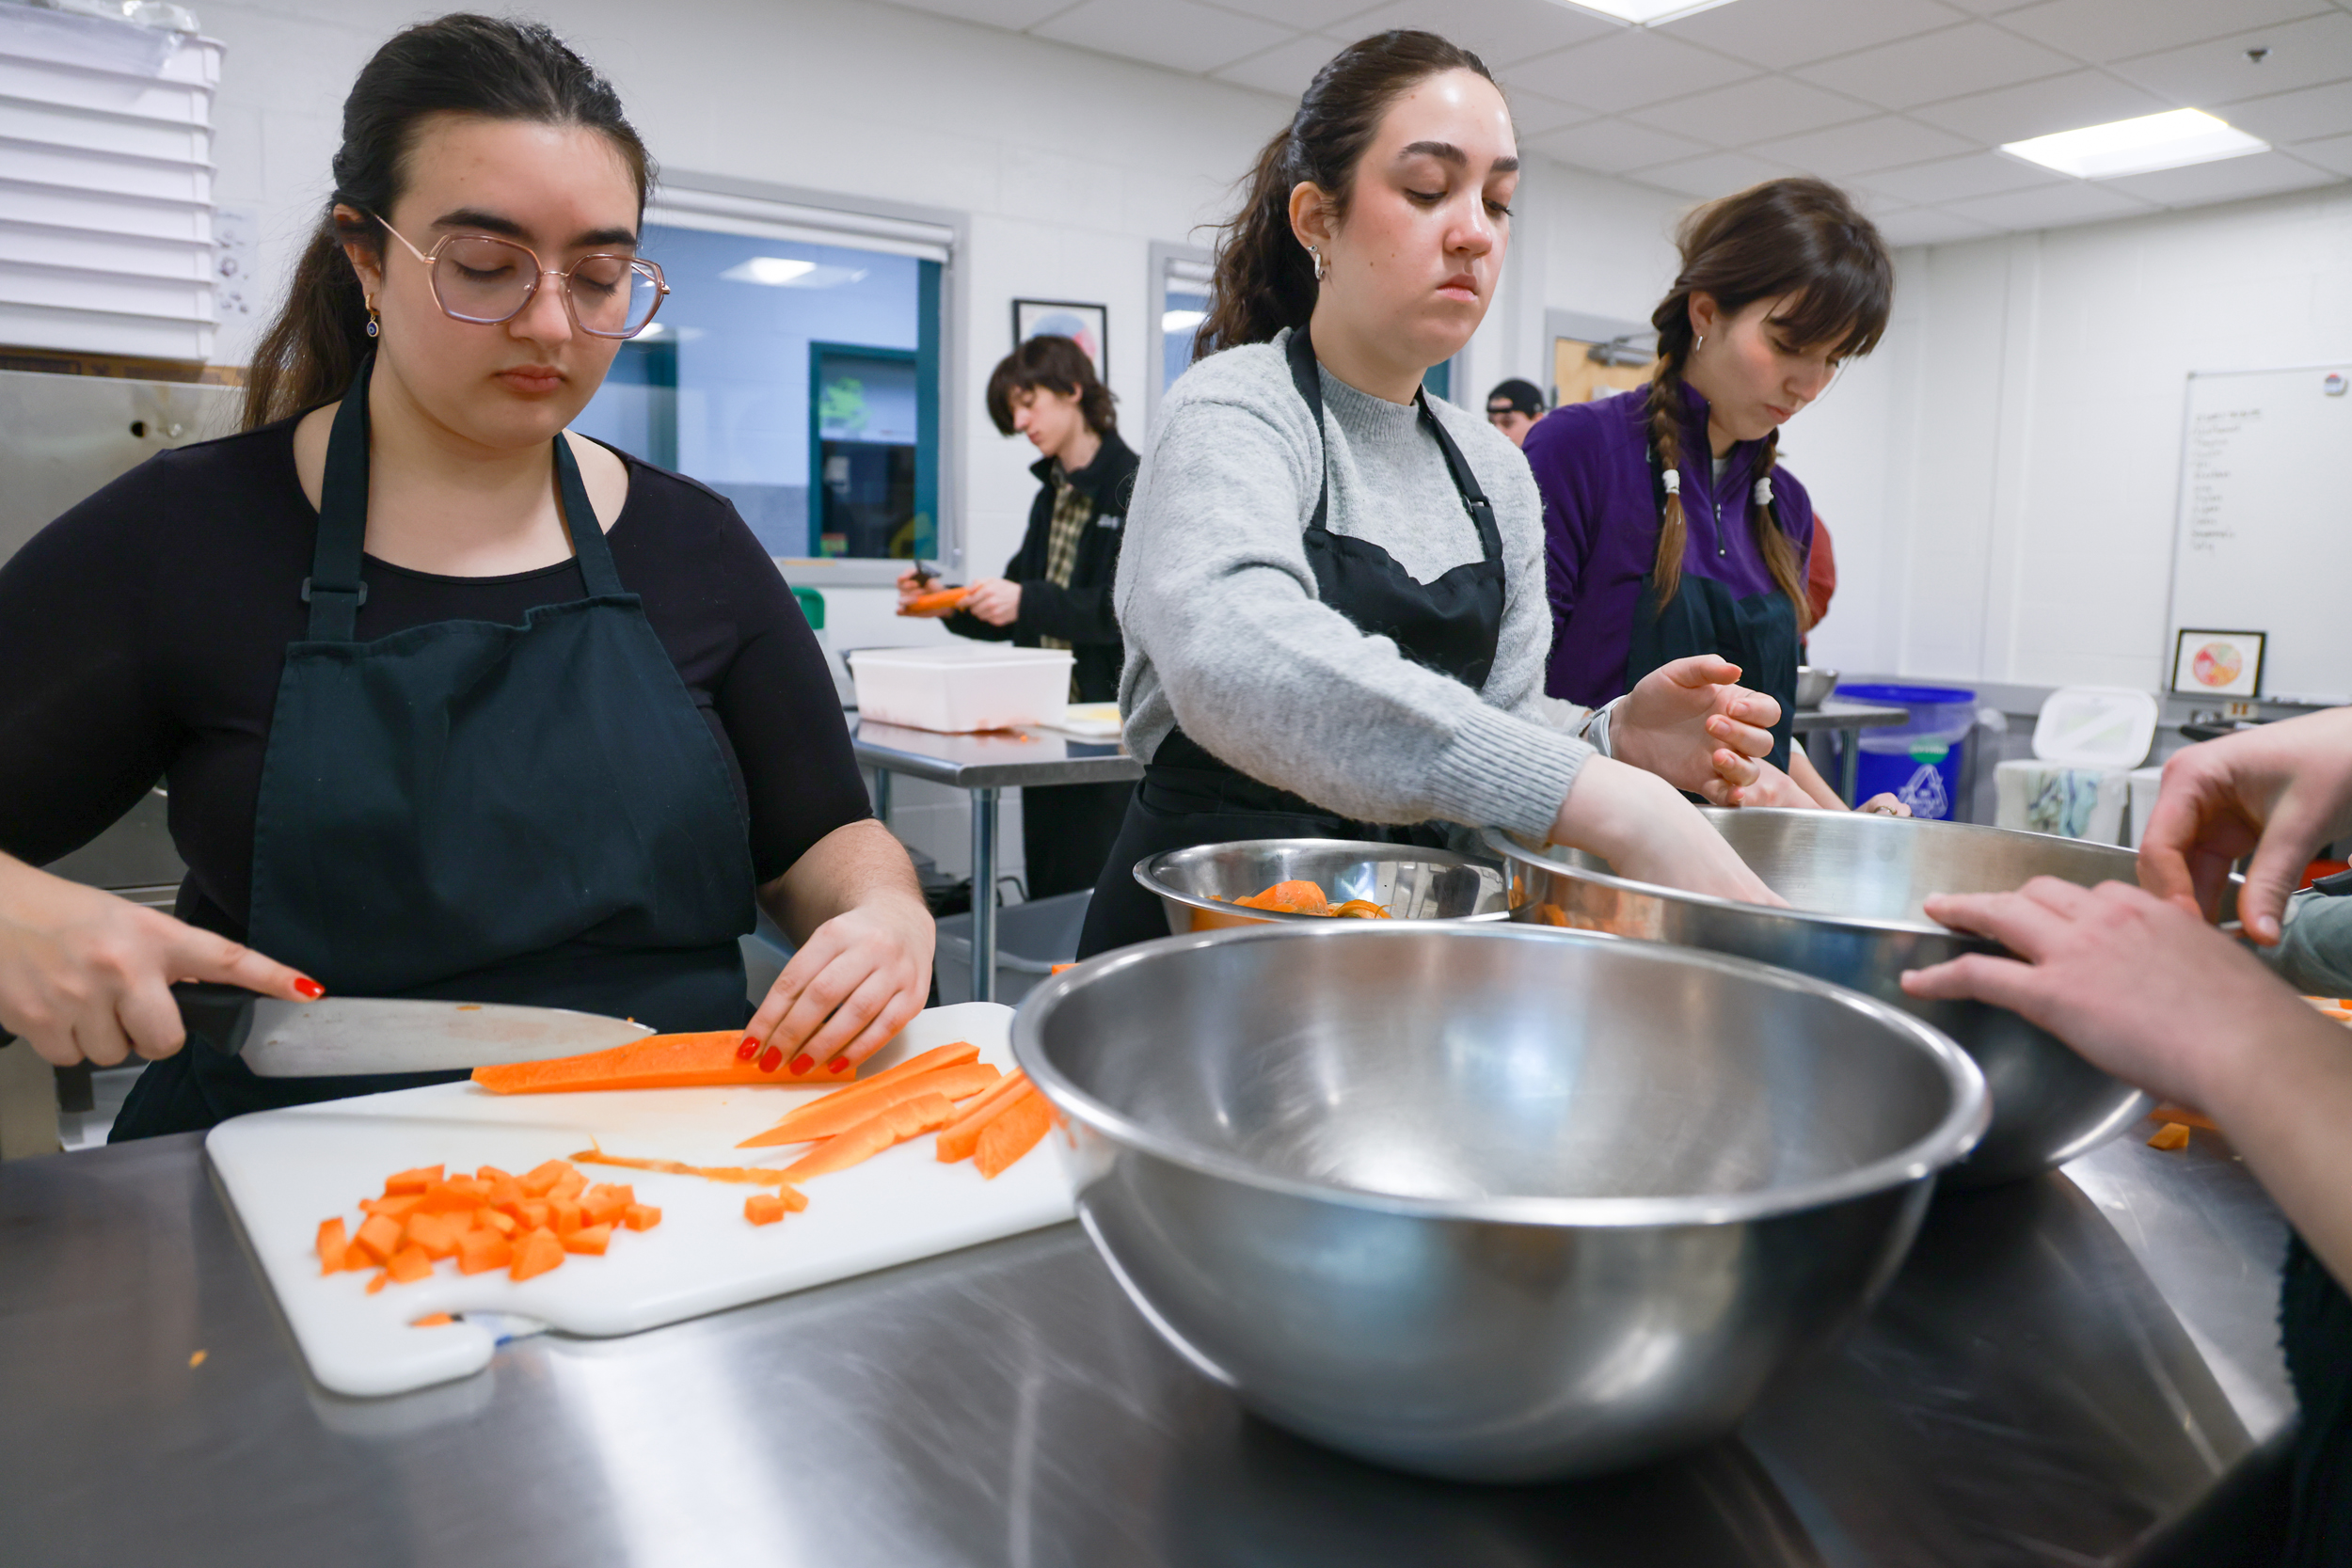 Students prepare carrots in an education kitchen.